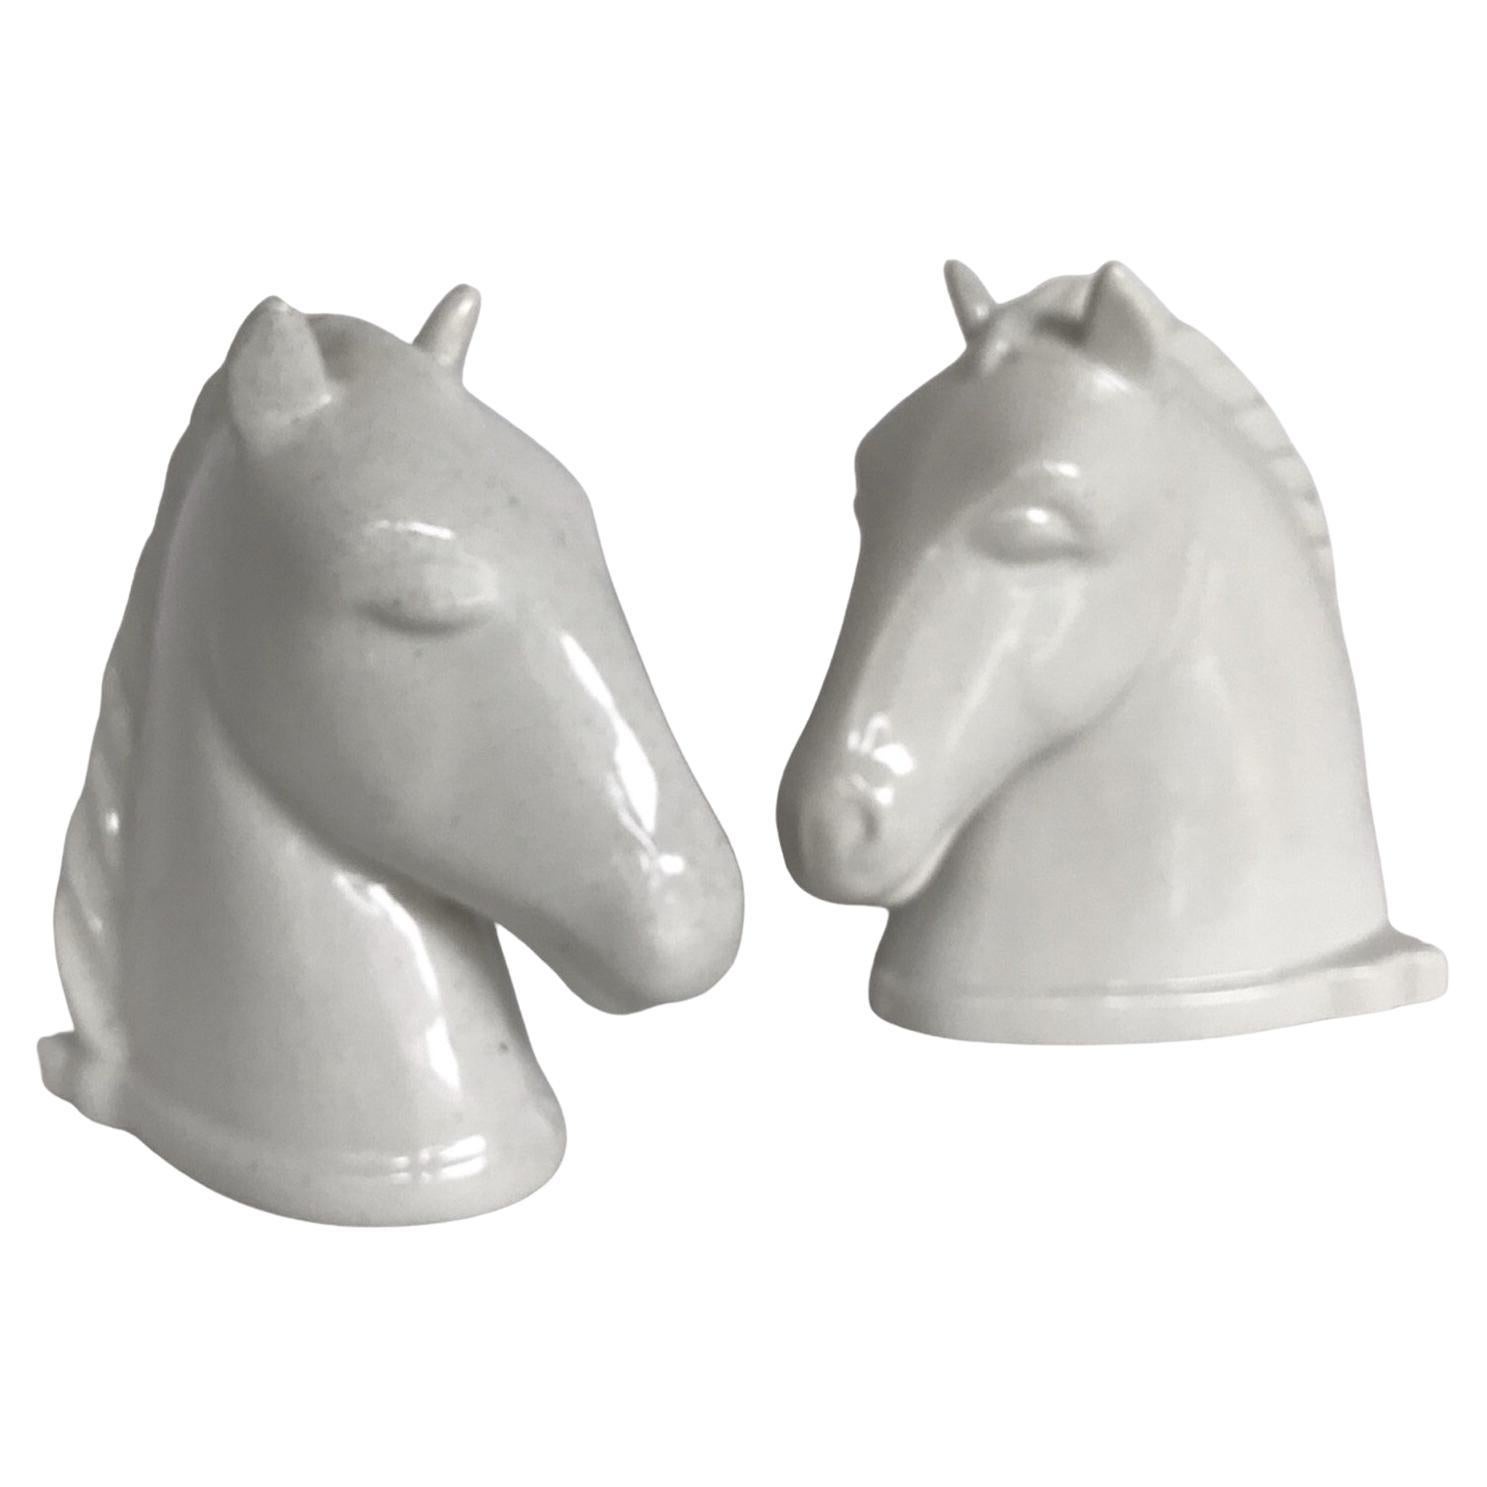 Abingdon Pottery Pair White Ceramic Mid Century Modern Horse Head Bookends 1940s For Sale